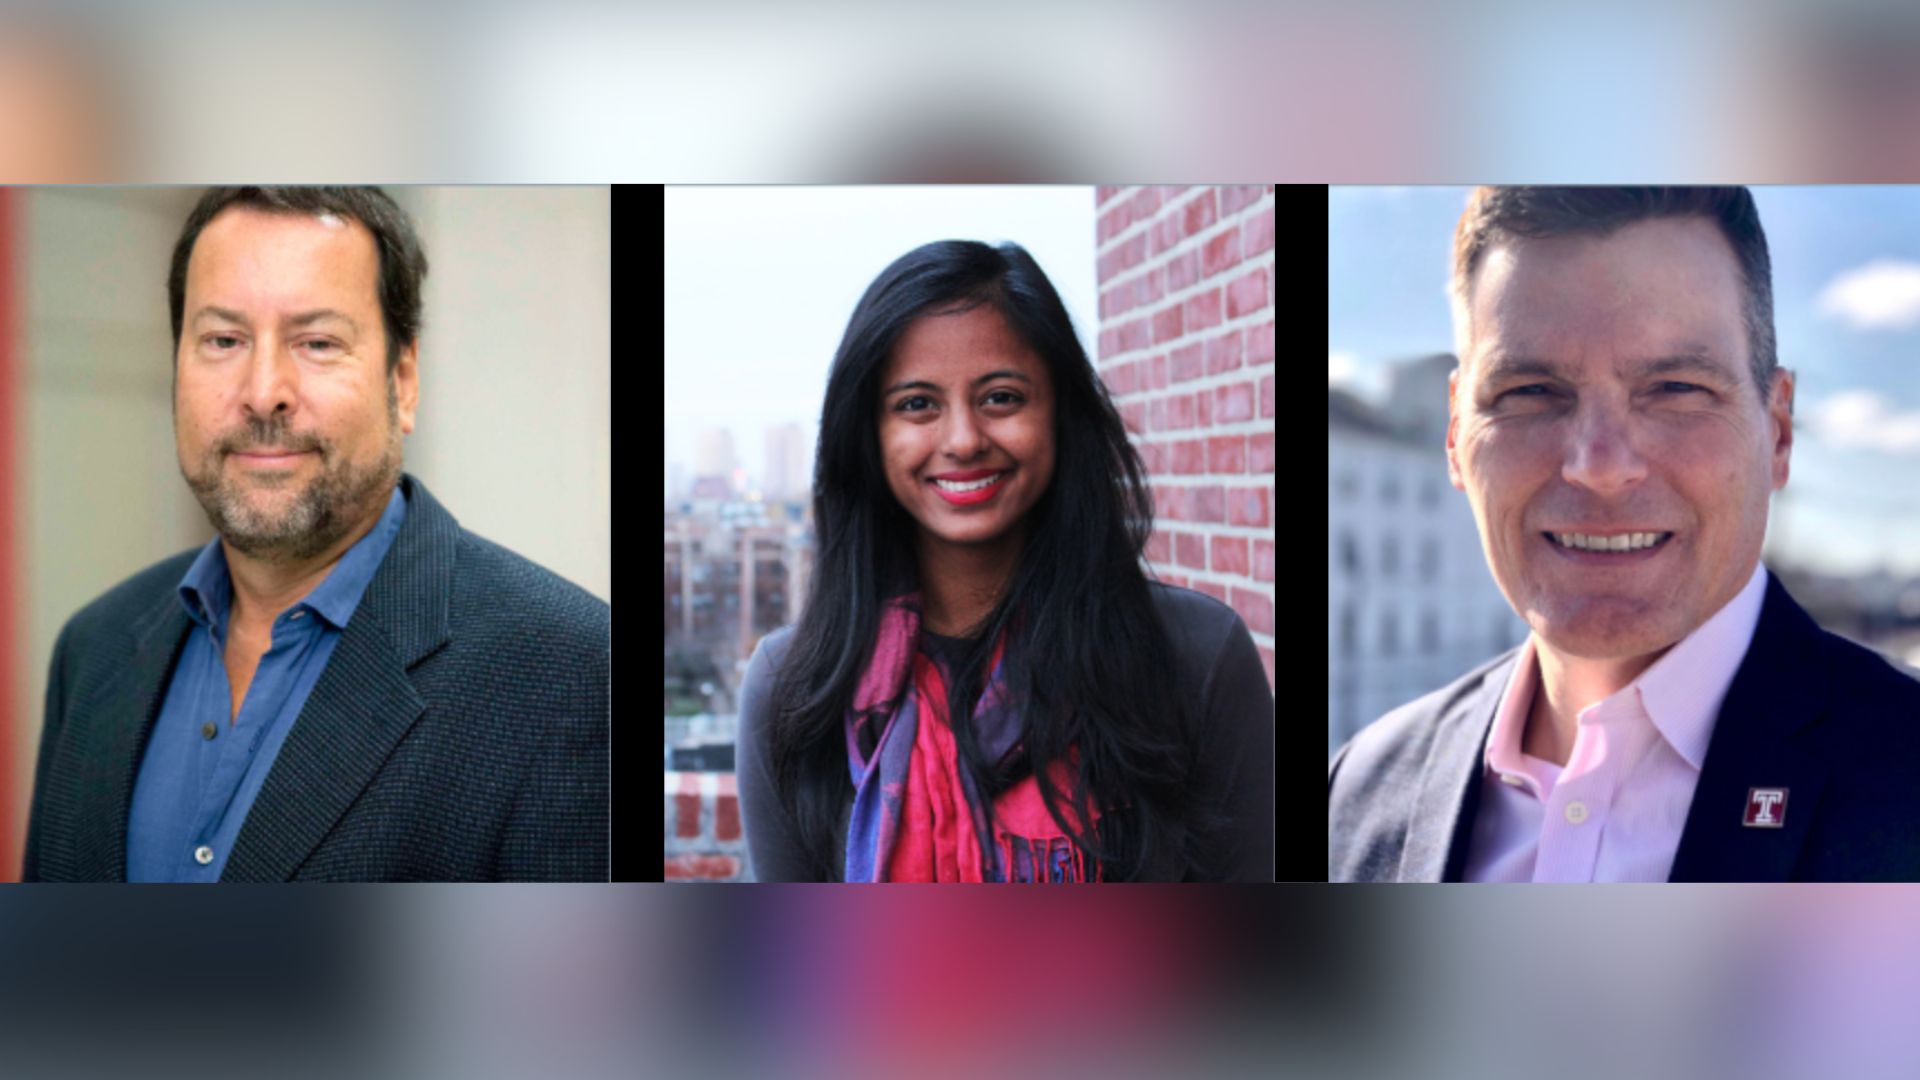 Assistant Professor of Practice and Assistant Chair for Public Relations Gregg Feistman, Assistant Professor Meghnaa Tallapragada and Assistant Professor of Instruction Steve Ryan